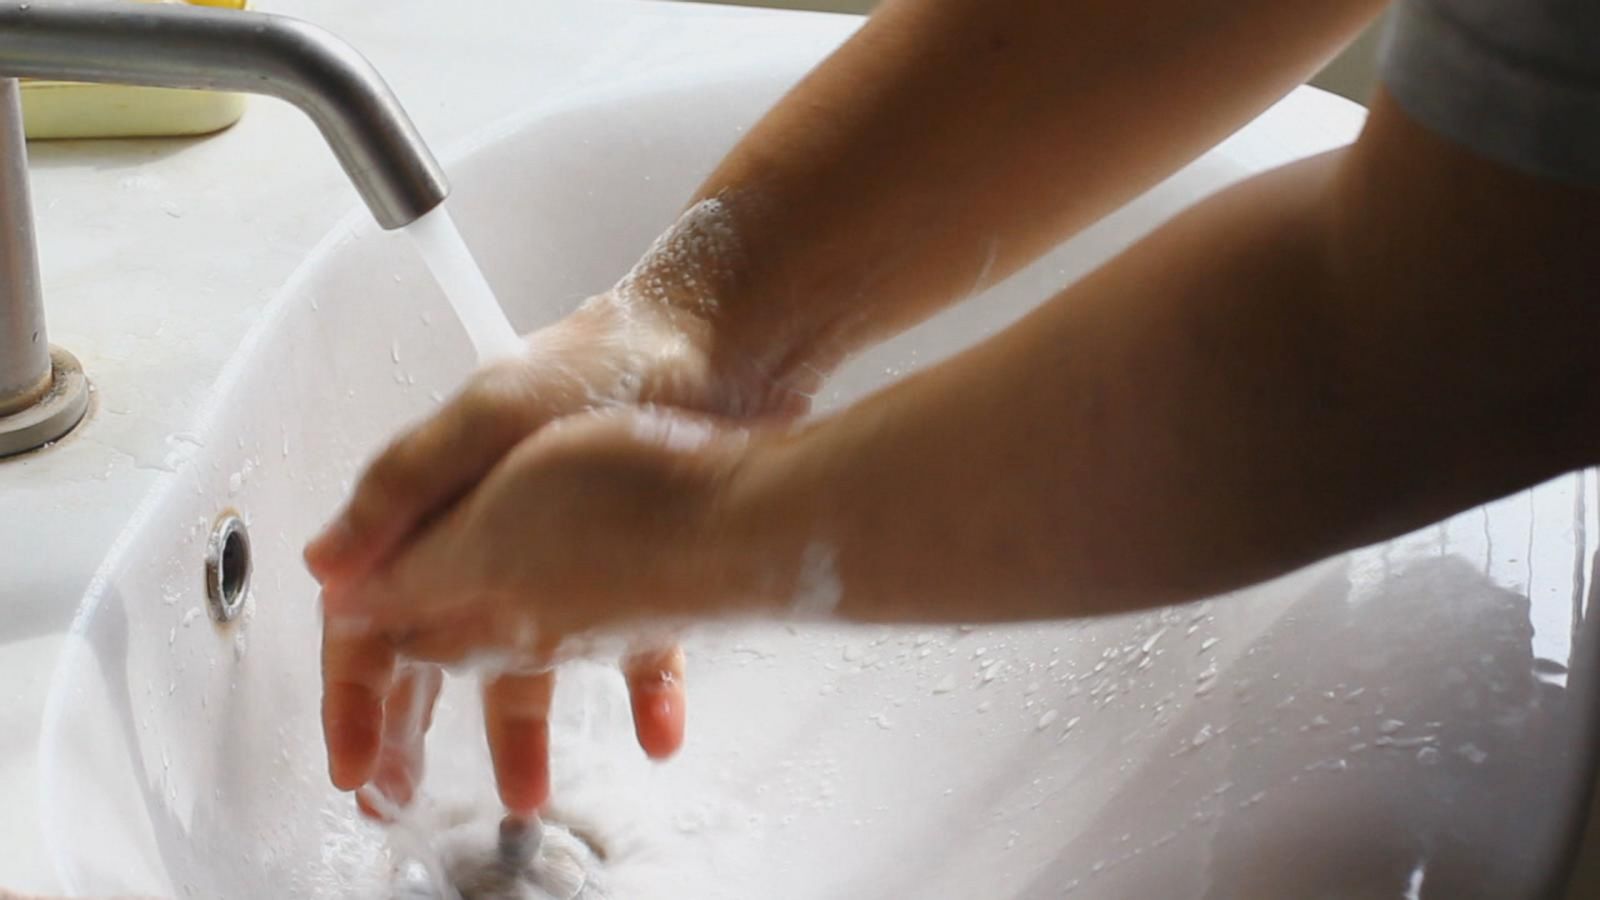 VIDEO;What's more effective during flu season: Hand washing vs. hand sanitizer